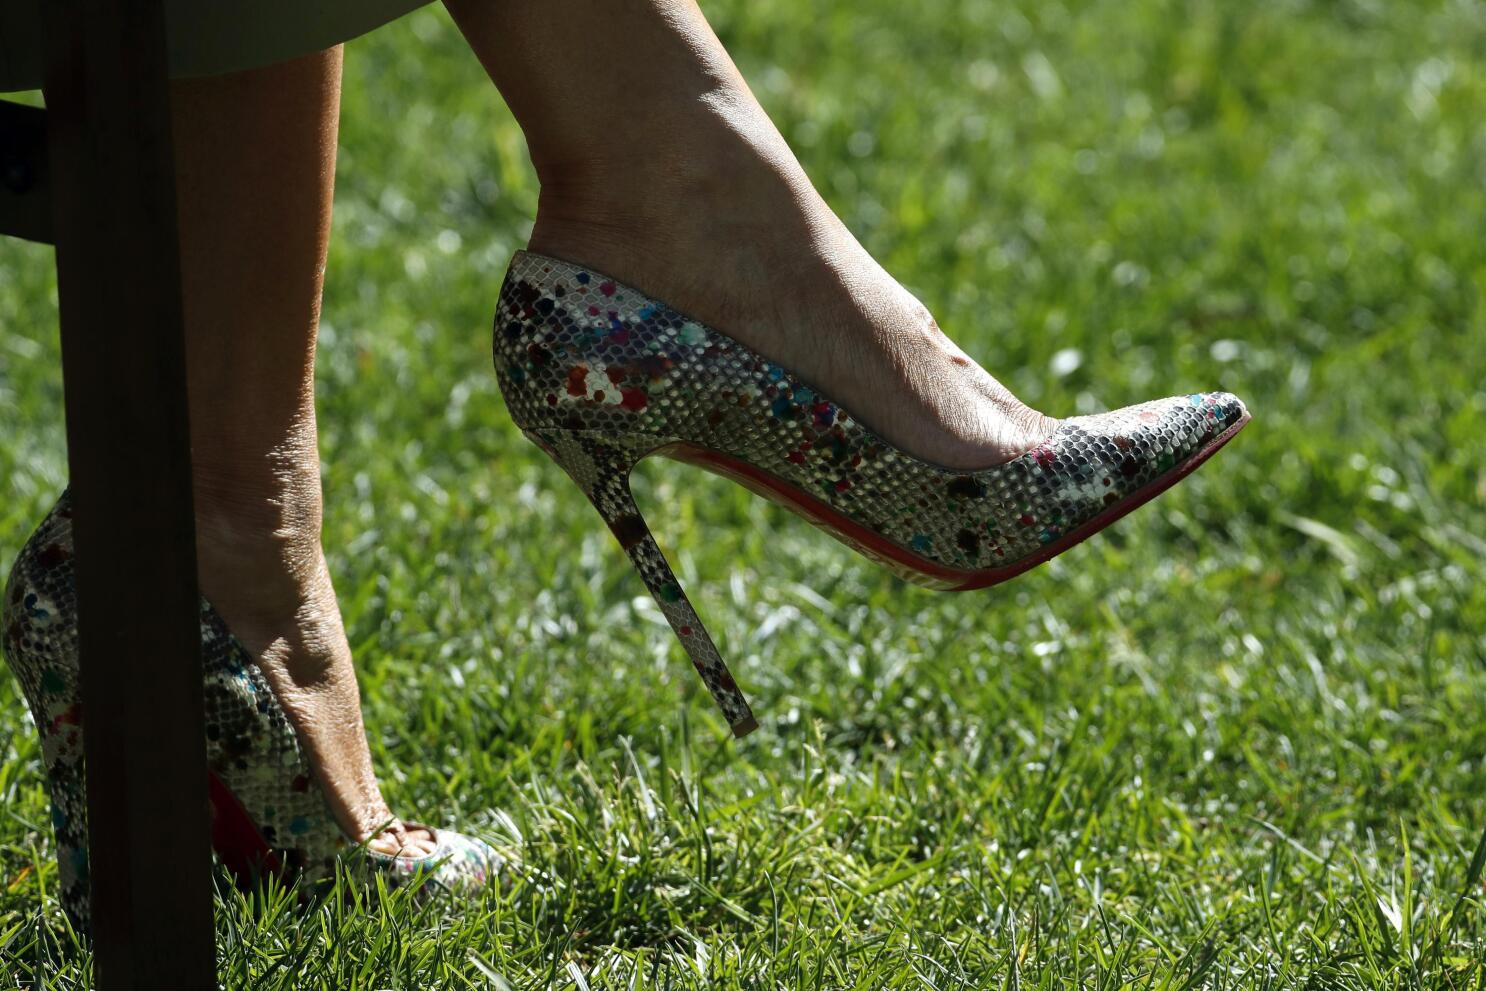 is not liable for online Louboutin counterfeits, EU court adviser  says - Corradini